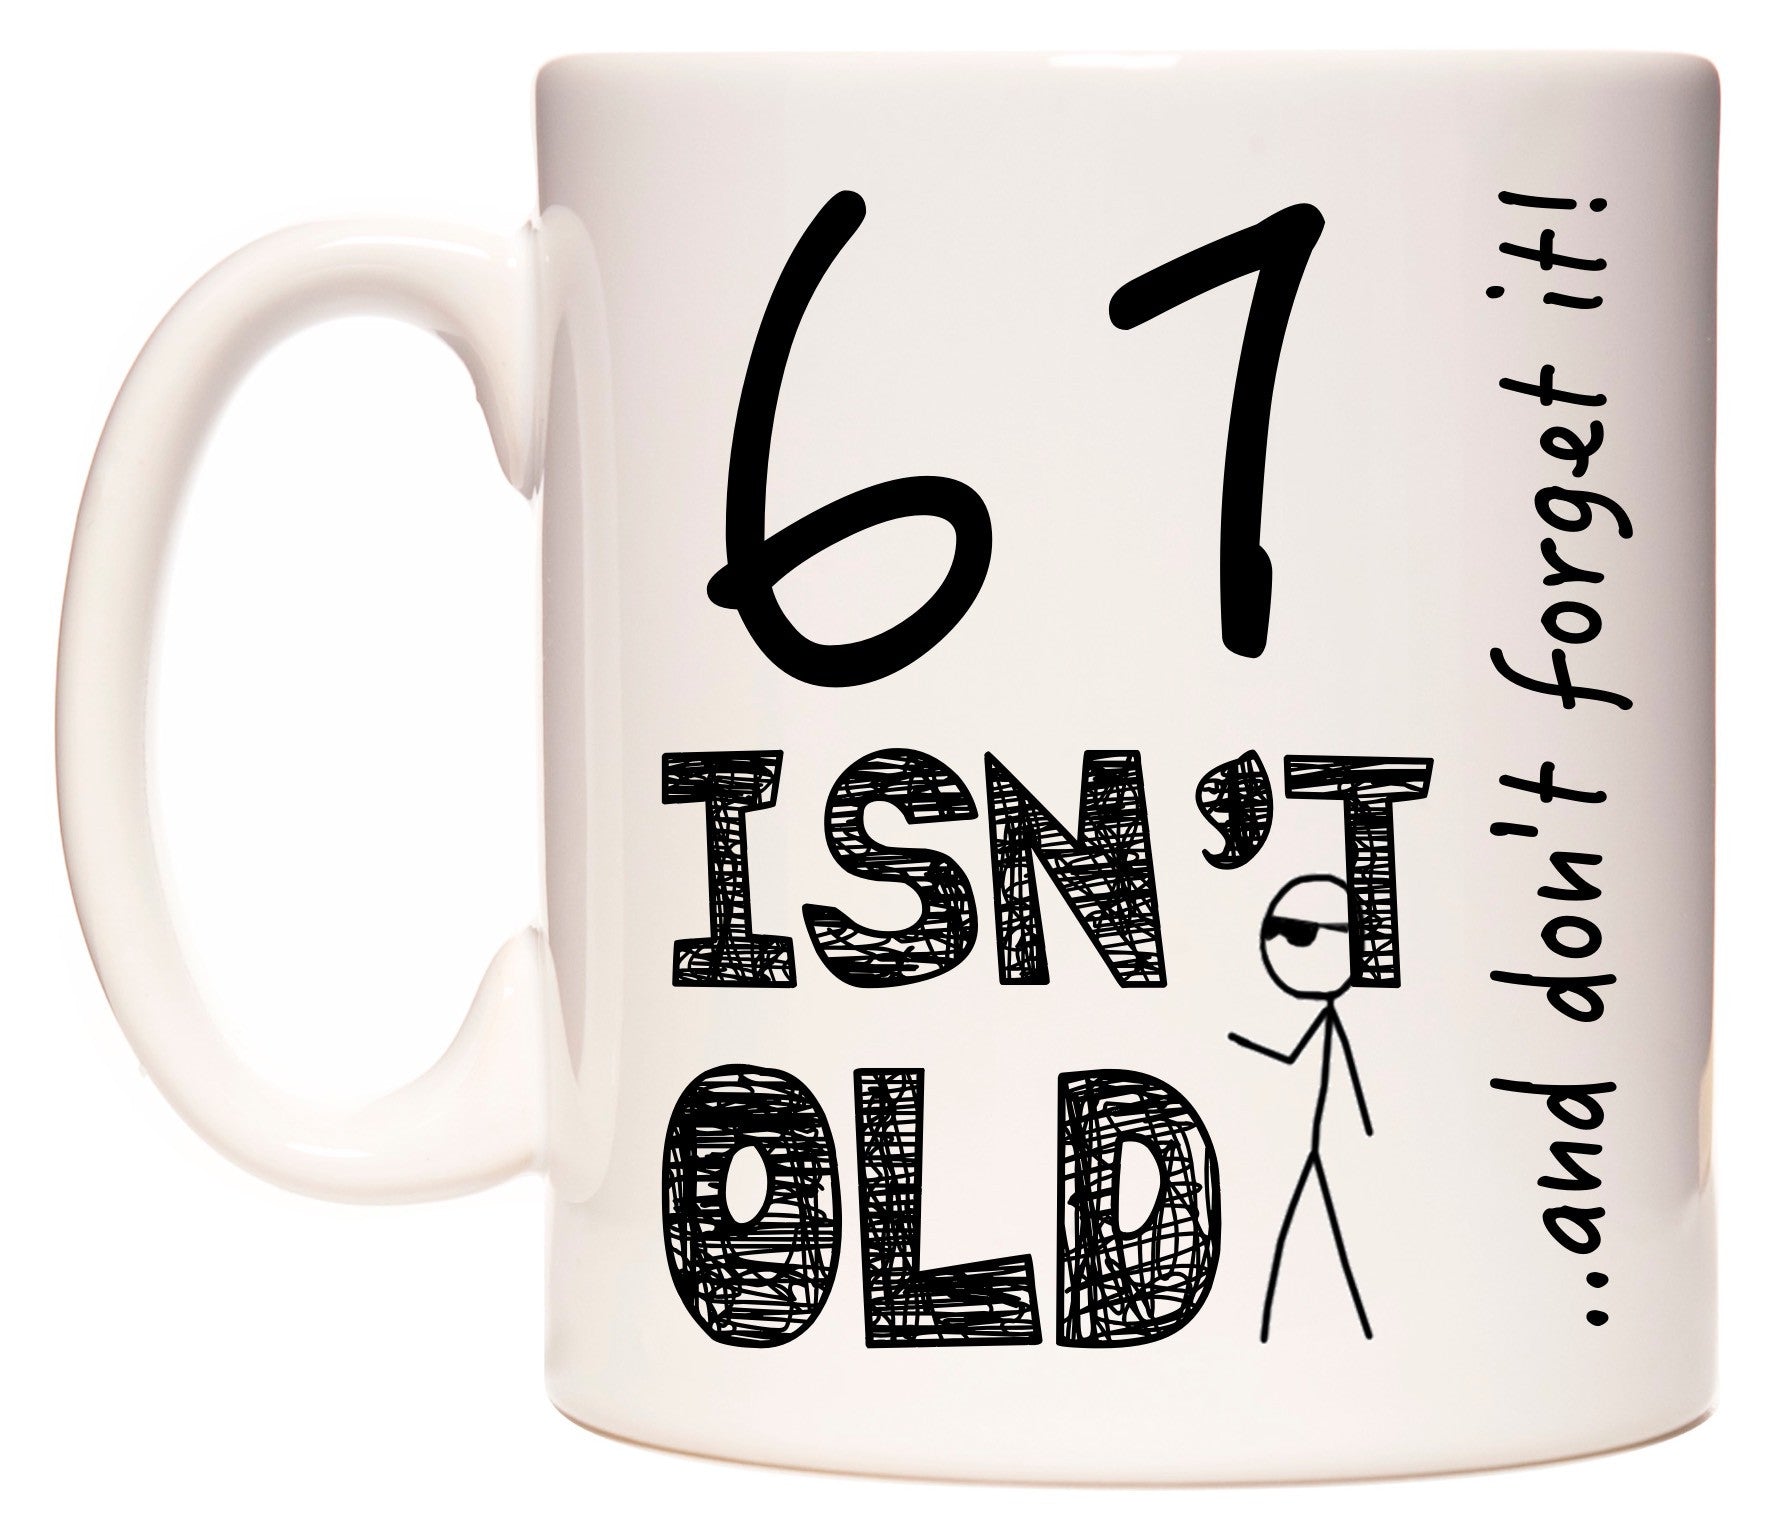 This mug features 61 Isn't Old